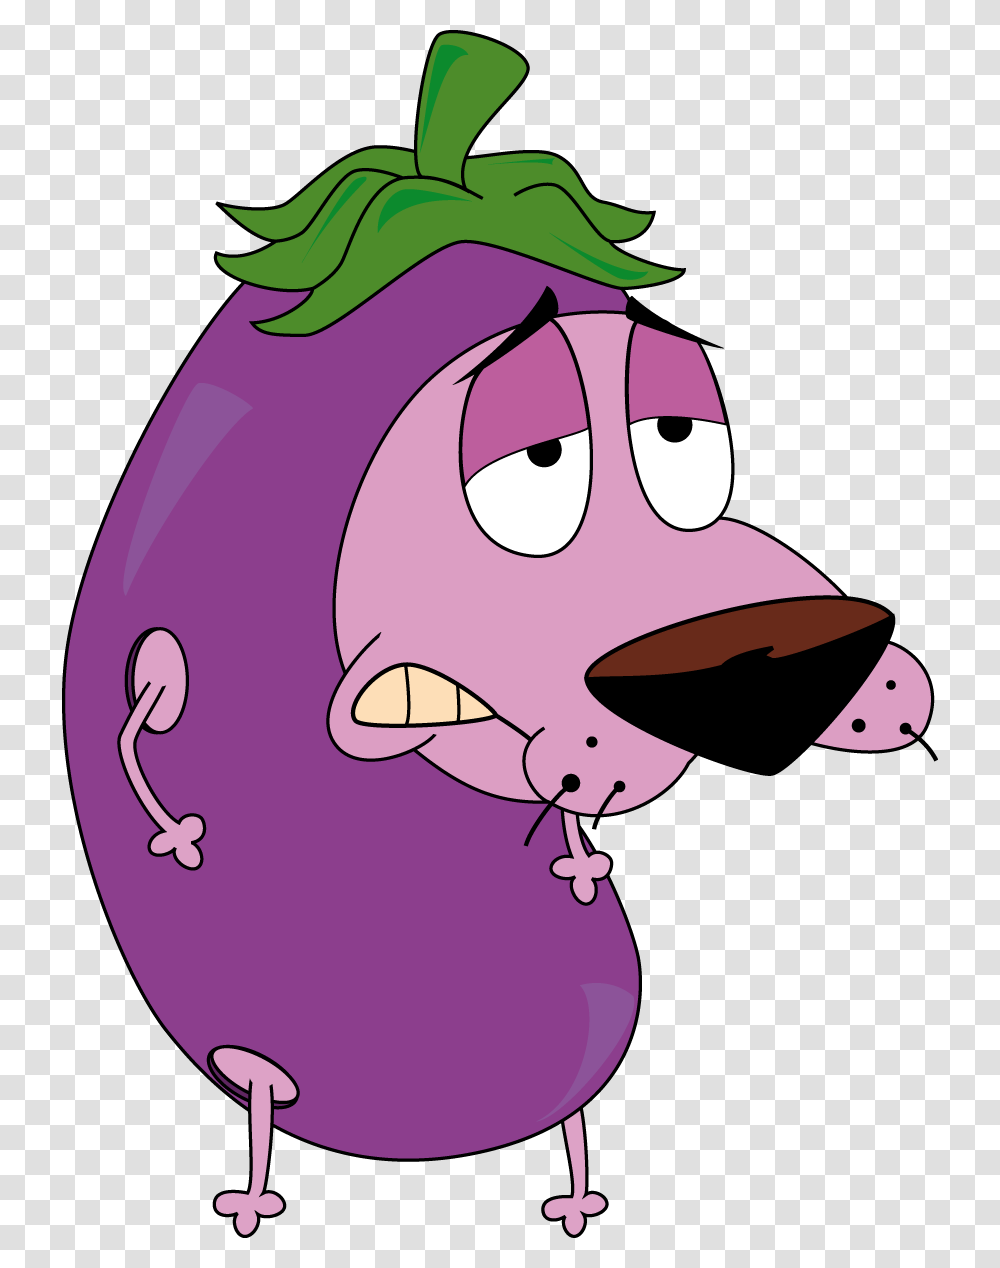 Courage Eggplant By Gth089 D4h0csw Courage The Dog Eggplant, Food, Angry Birds Transparent Png